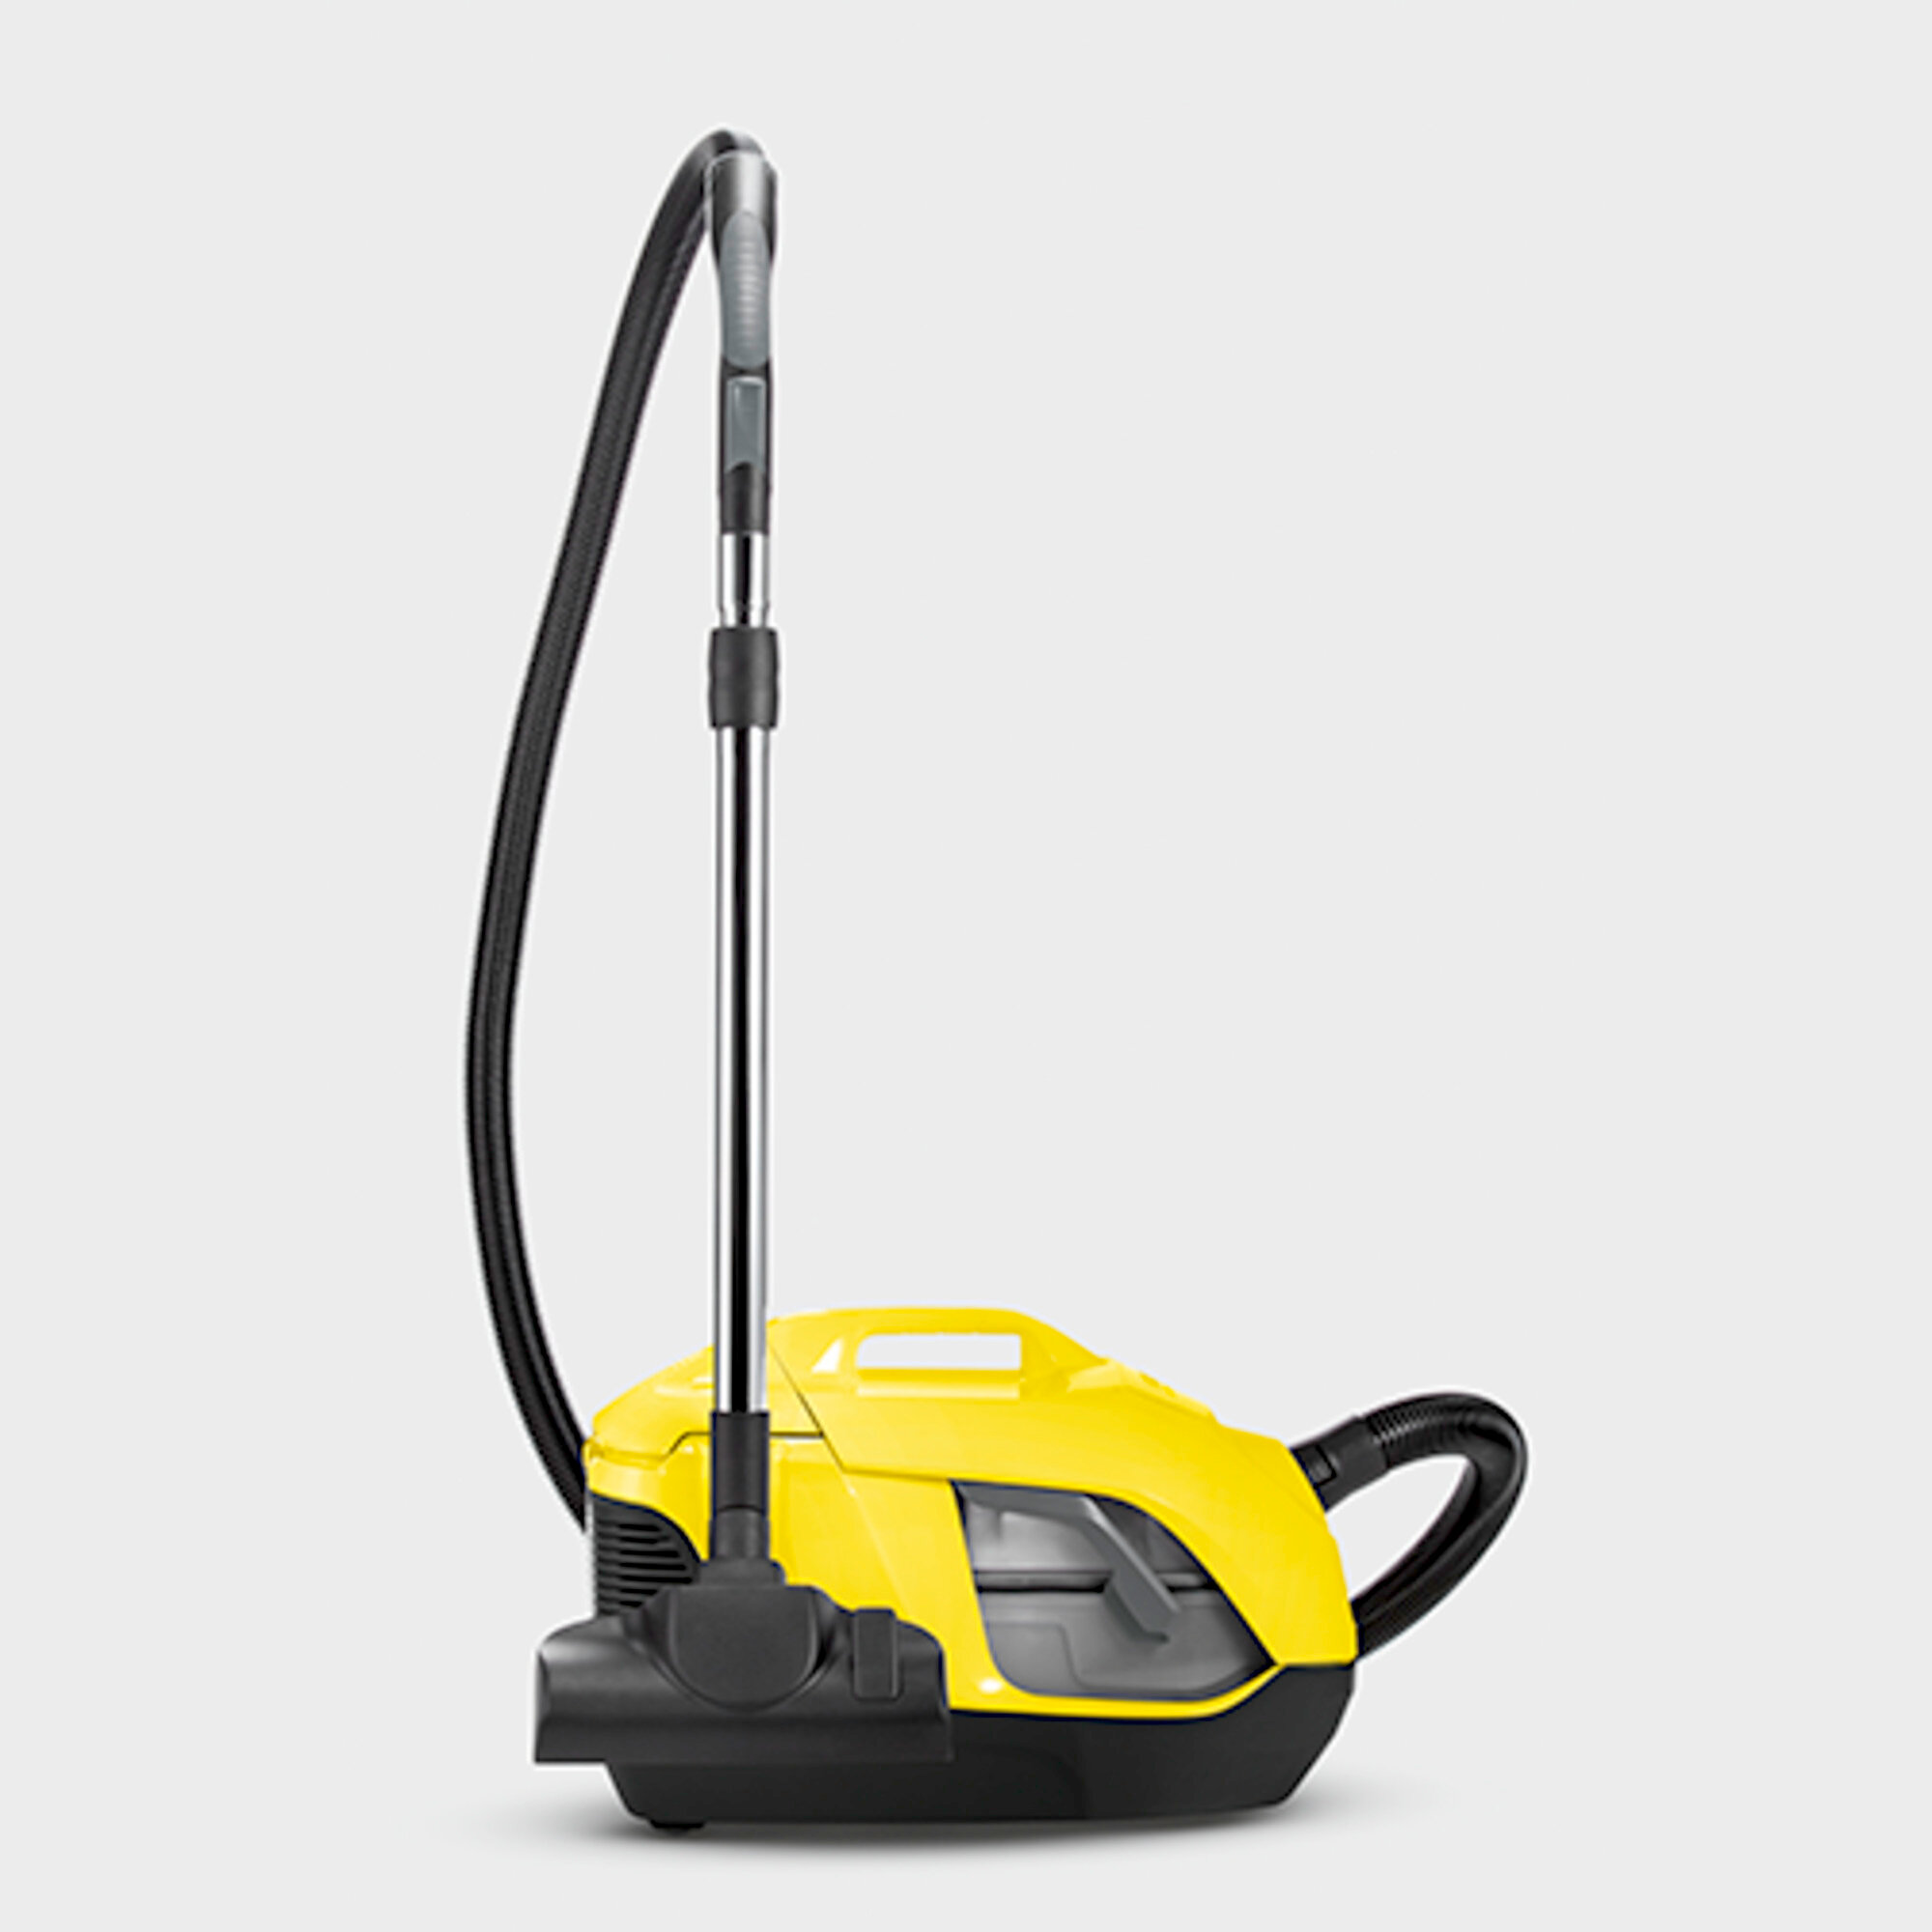 Water filter vacuum cleaner DS 5.800 Waterfilter: Practical parking position